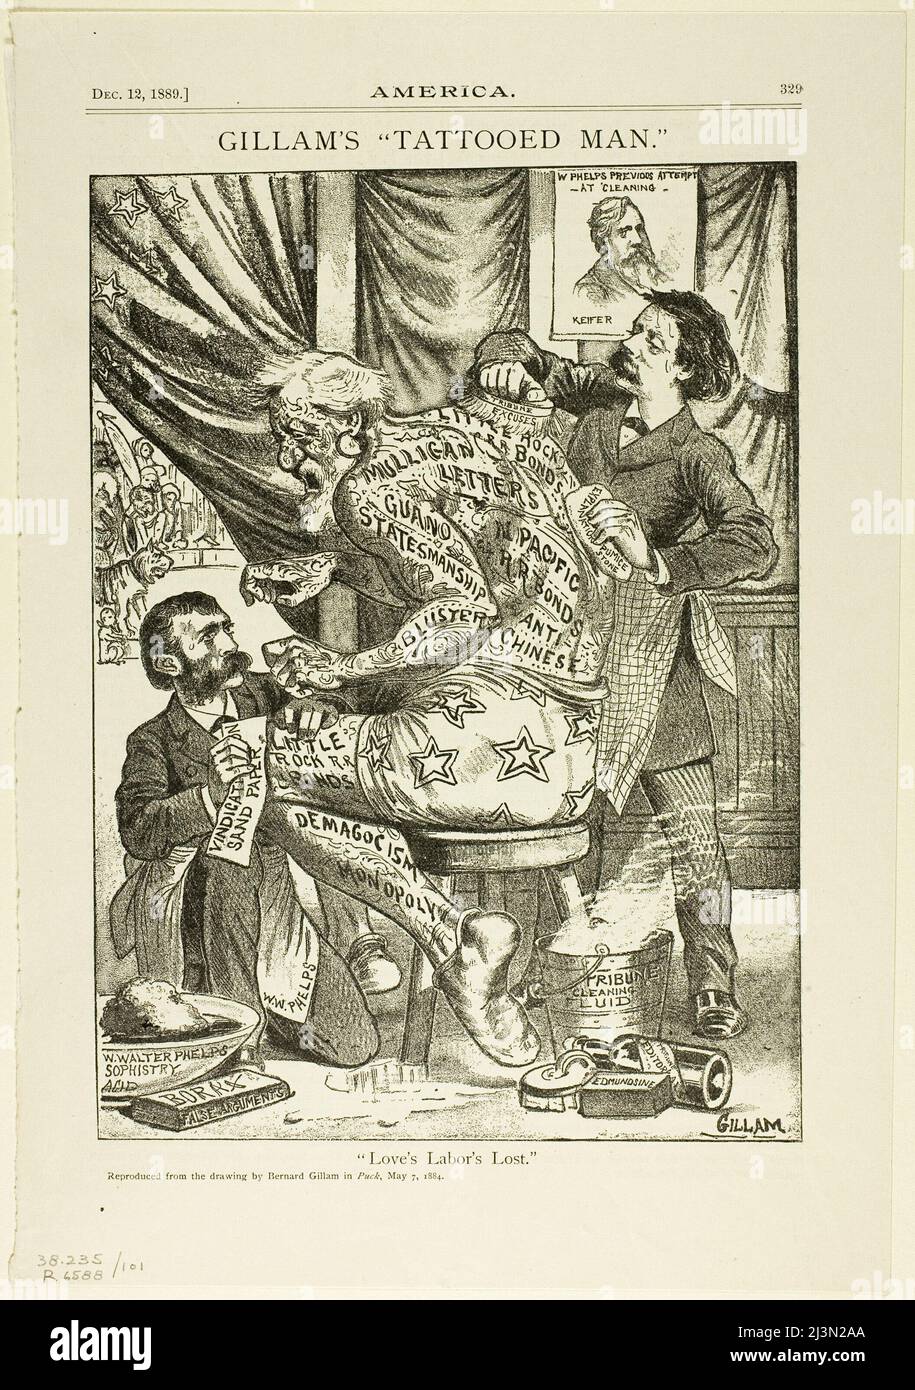 Love's Labor Lost, from America, published December 12, 1889, originally published in Puck on May 7, 1884. Stock Photo